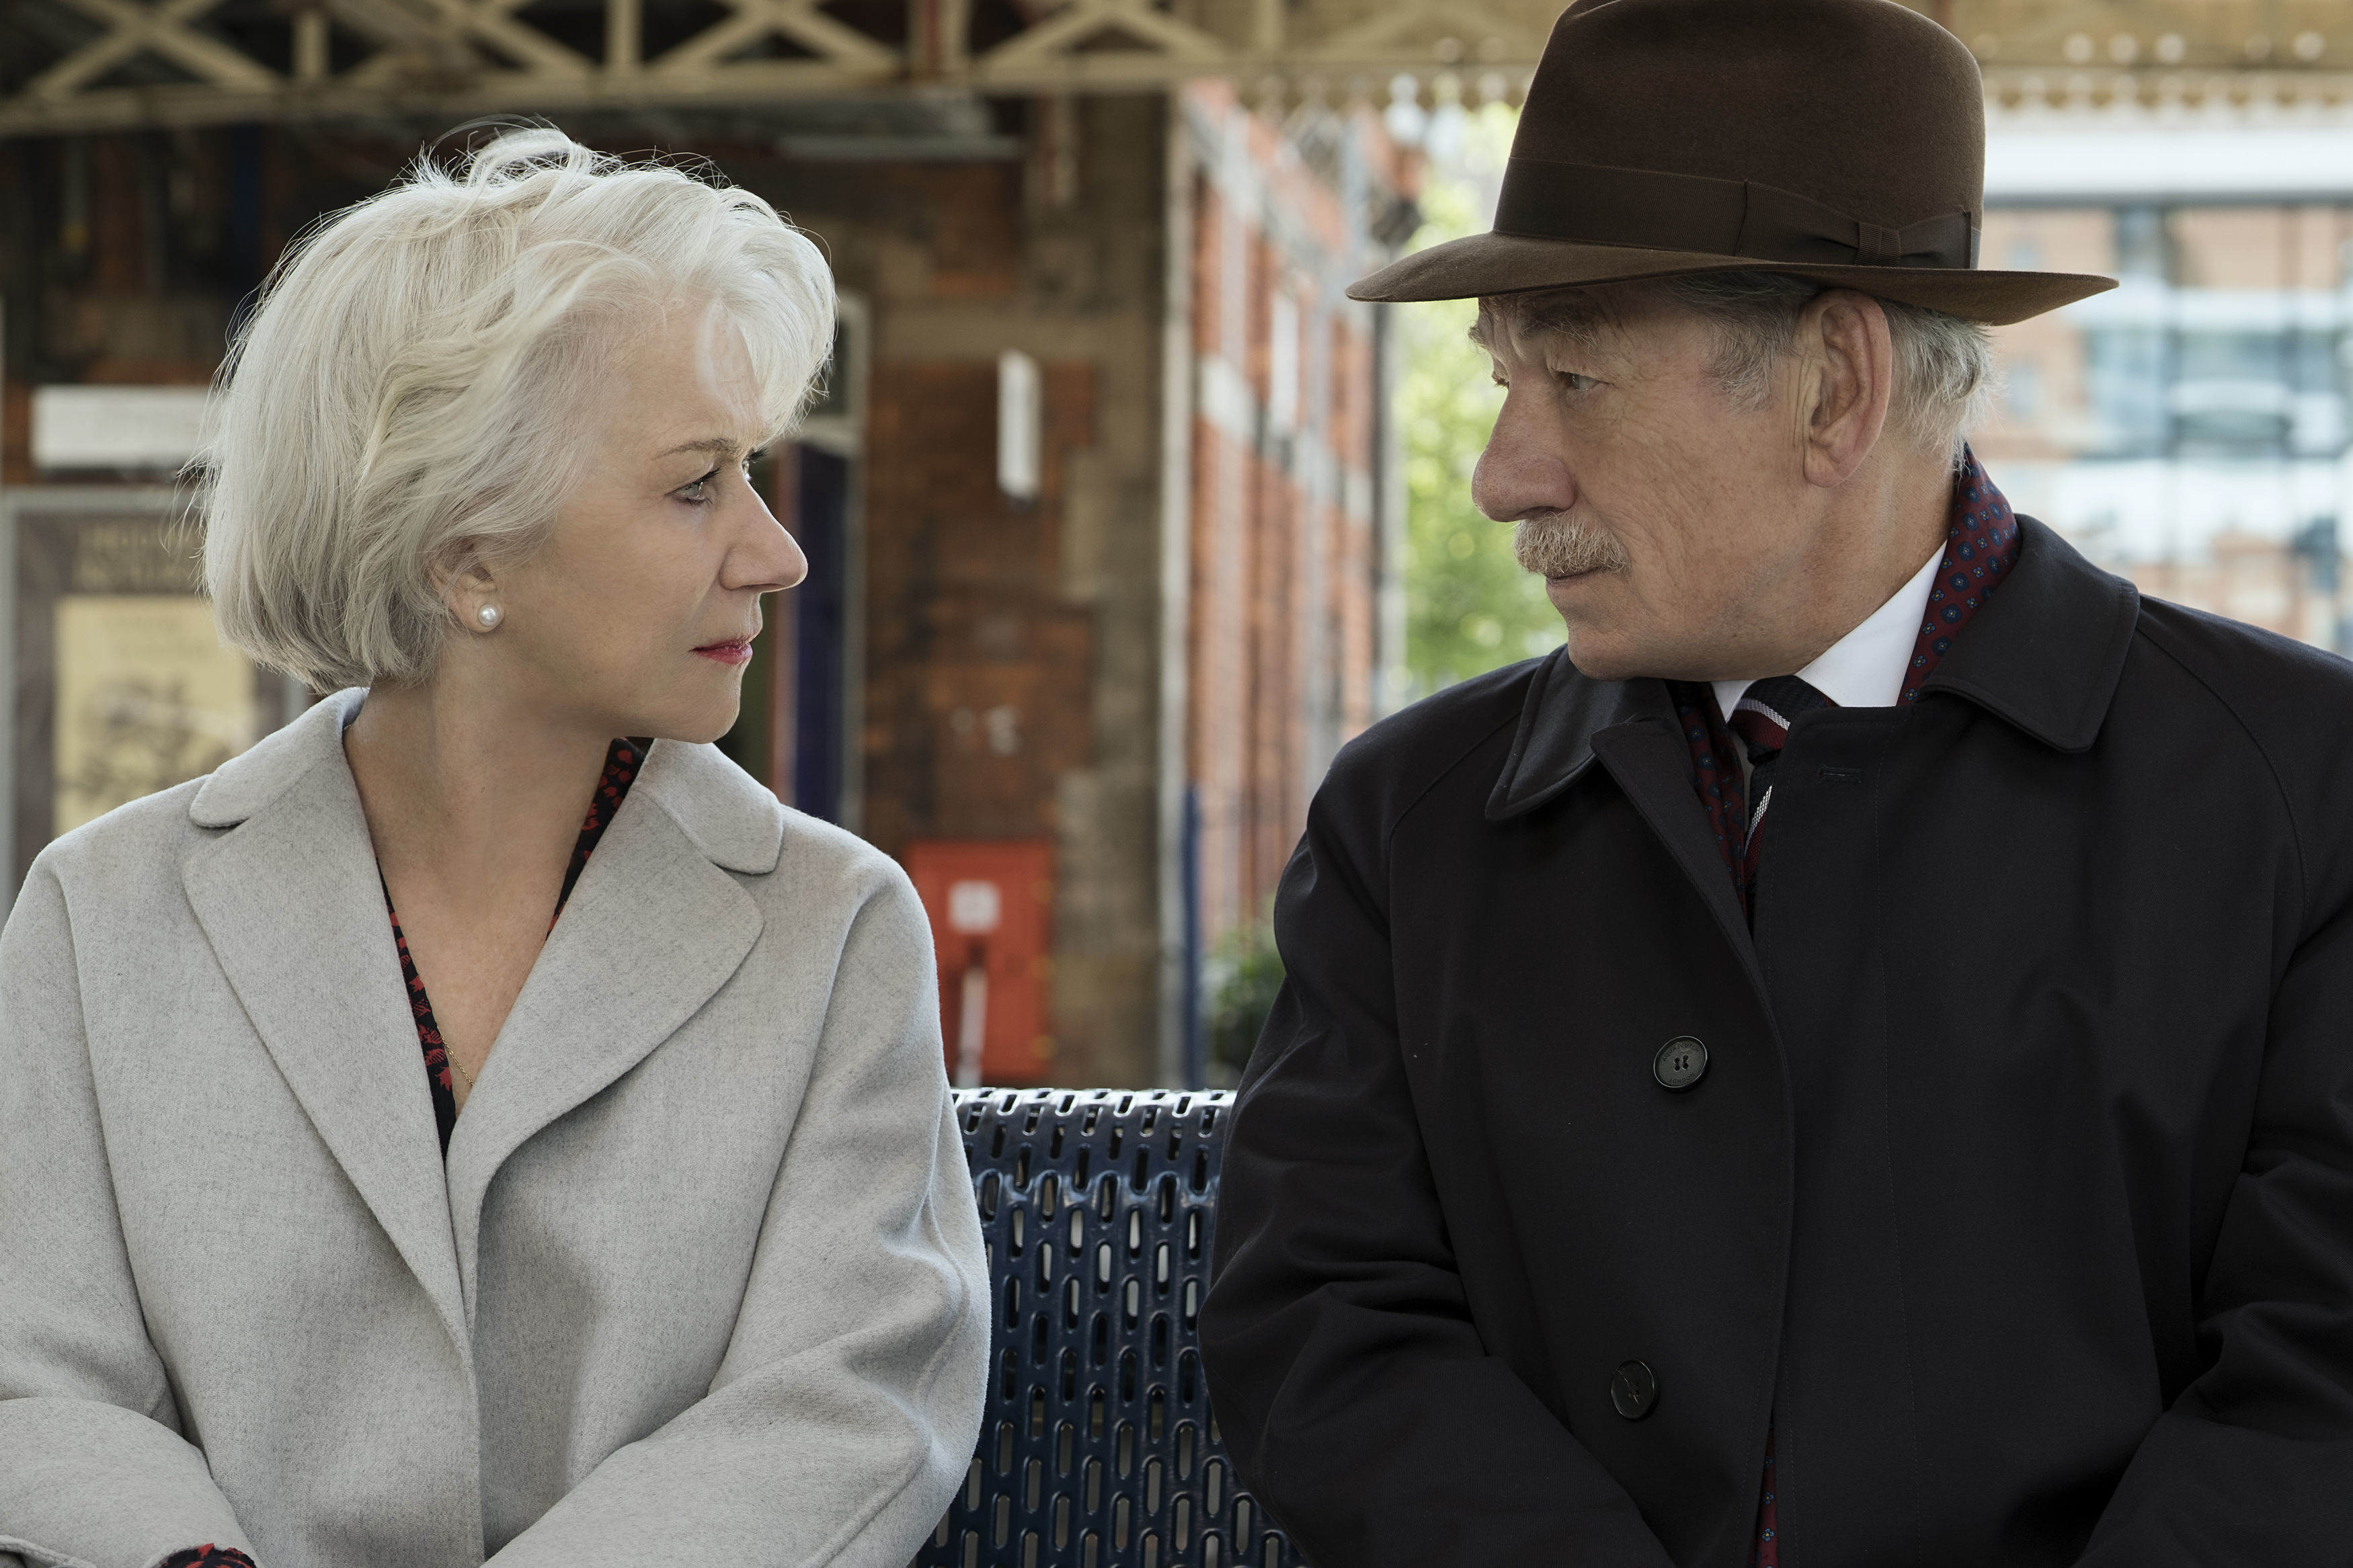 Ian McKellen and Helen Mirren star as con artist Roy Courtnay and well-to-do widow Betty McLeish in The Good Liar